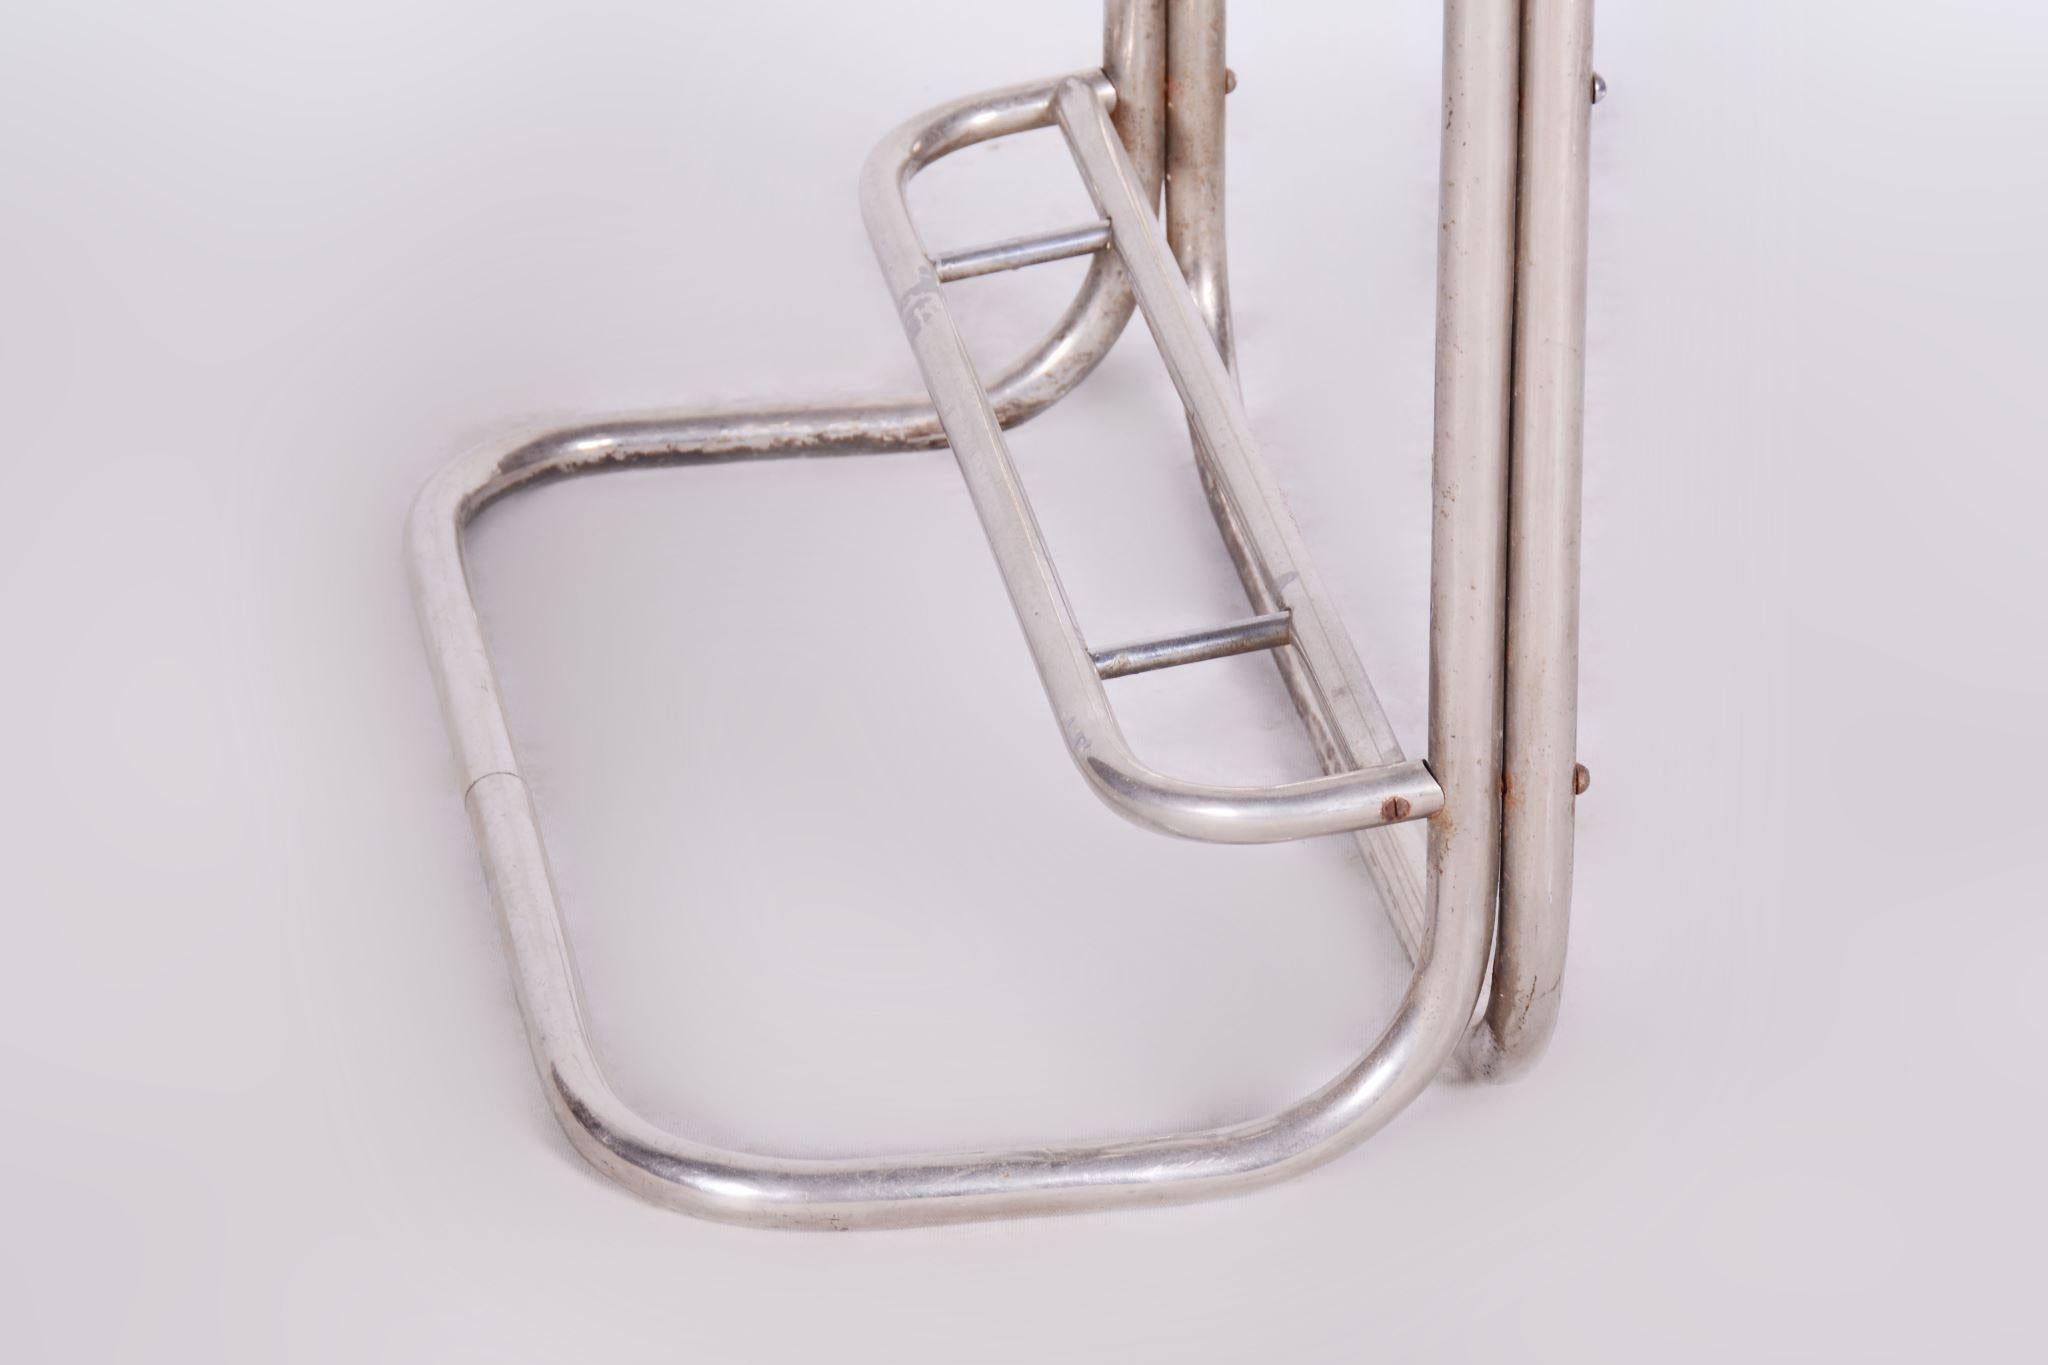 Original Bauhaus Dressing Room Wall.

Material: Chrome-Plated Steel
Source: Czechia (Czechoslovakia)
Period: 1930-1939

In pristine original condition, the item has been professionally cleaned, and its polish has been revived by our